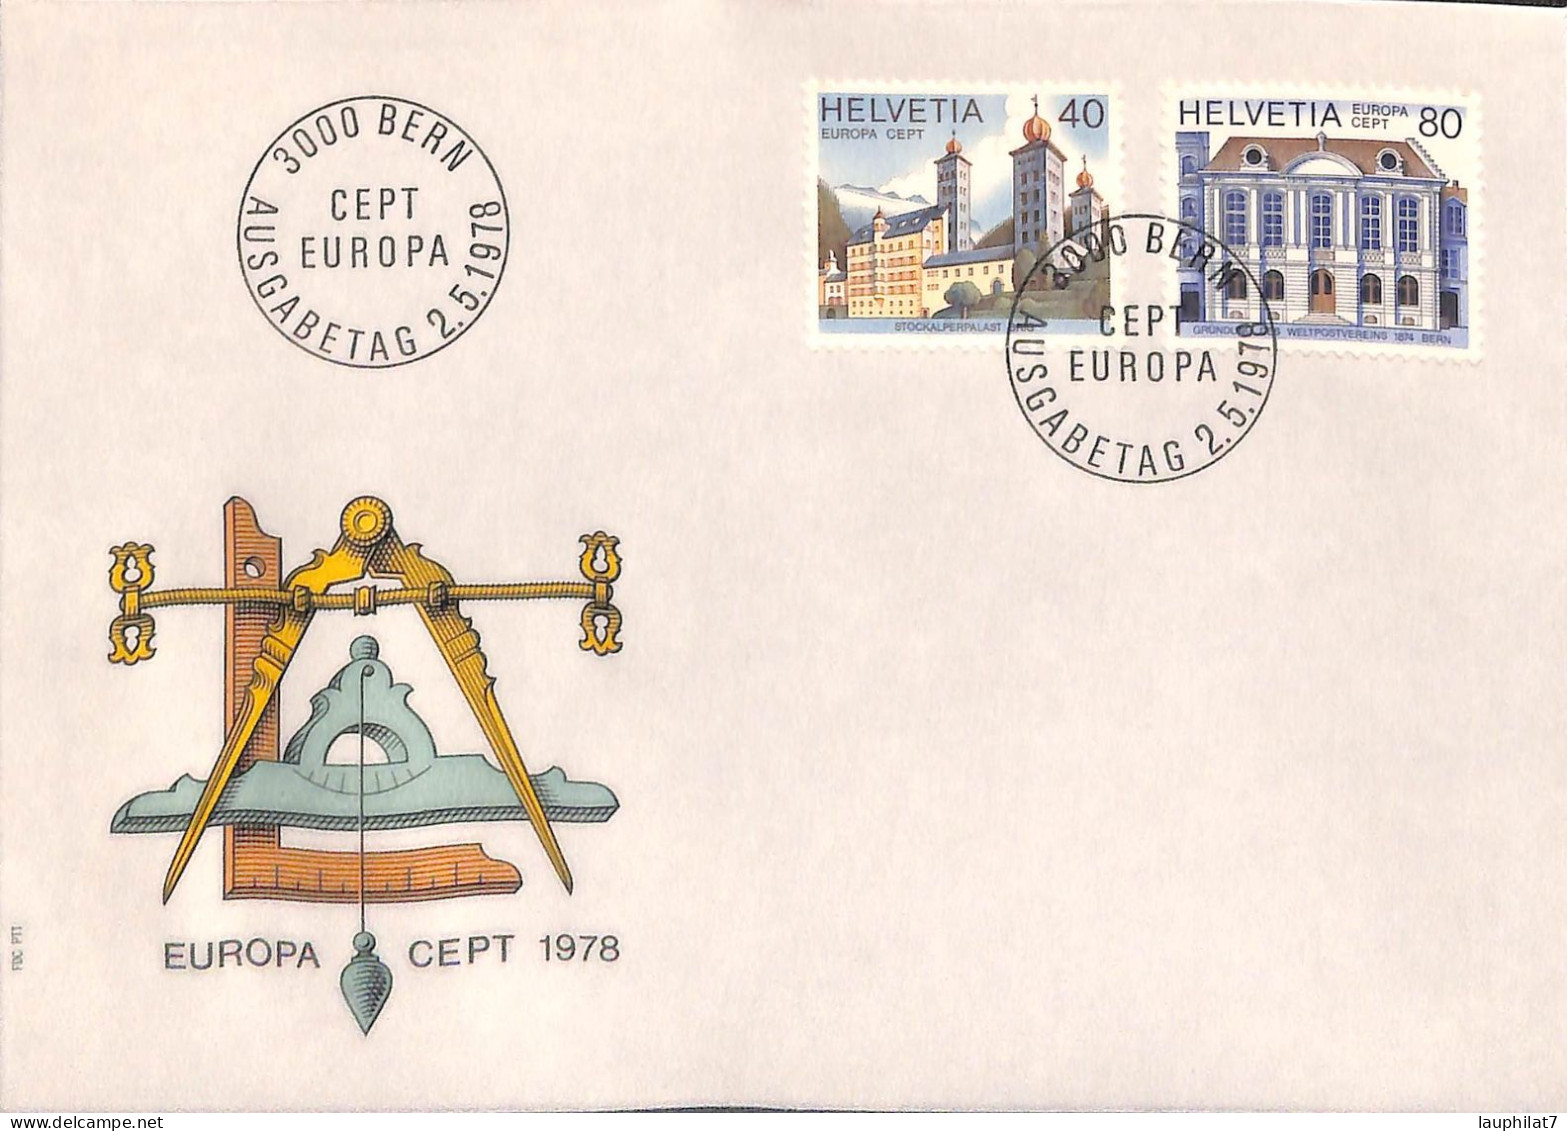 [900196]TB//-Suisse 1978 - FDC, Documents, BERN, Europa-Cept, Architectures - 1978